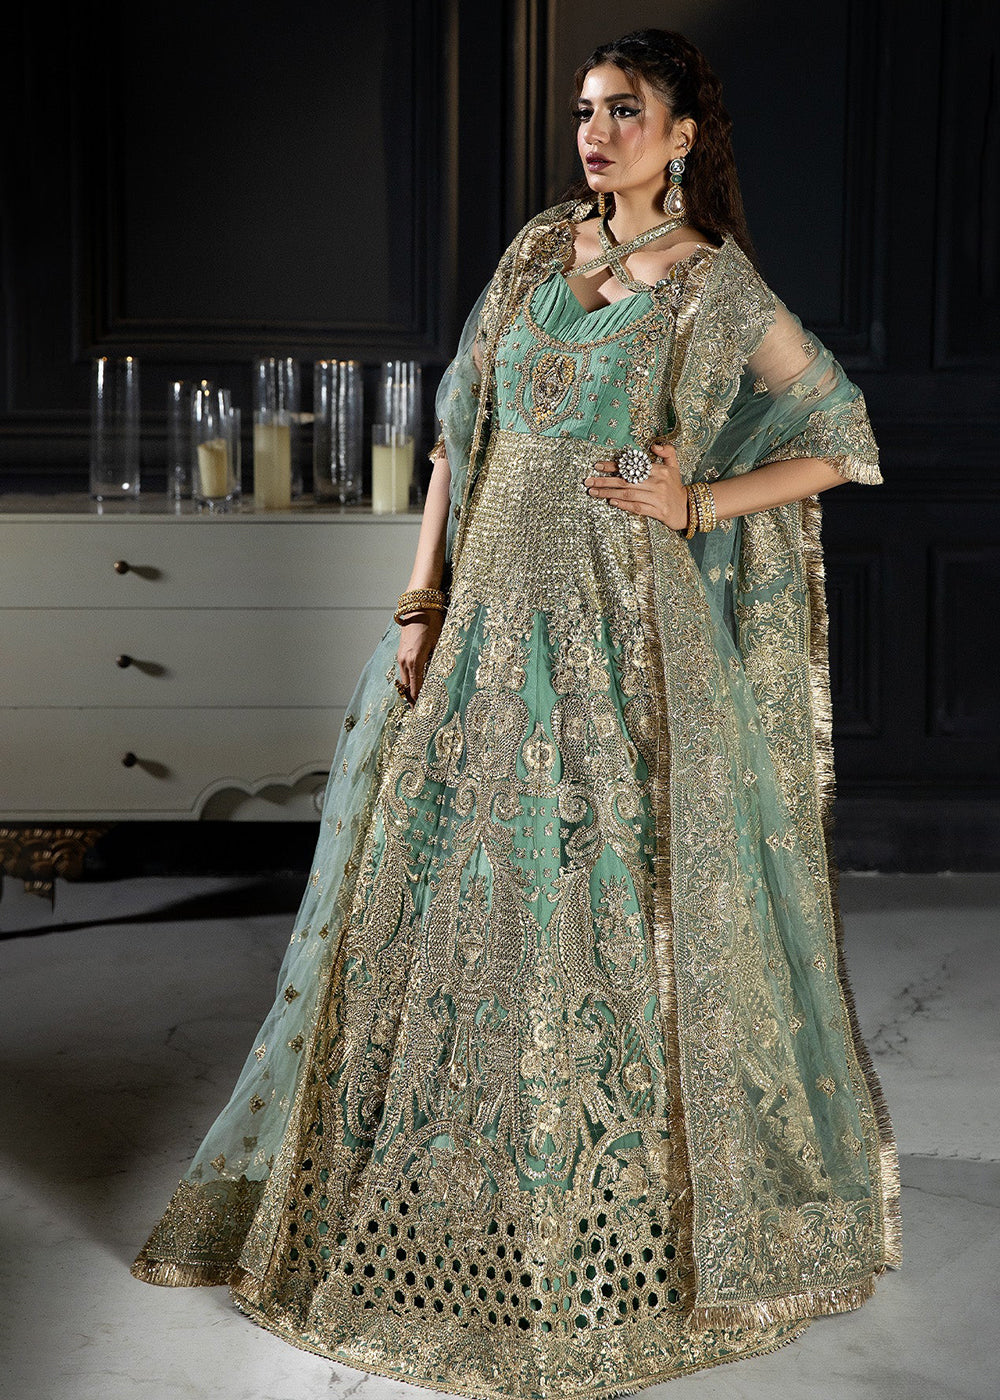 Buy Now Andaaz-E-Khaas Bridal Formals 2023 by Imrozia | IB-45 Unaysa Online at Empress Online in USA, UK, Canada & Worldwide at Empress Clothing. 